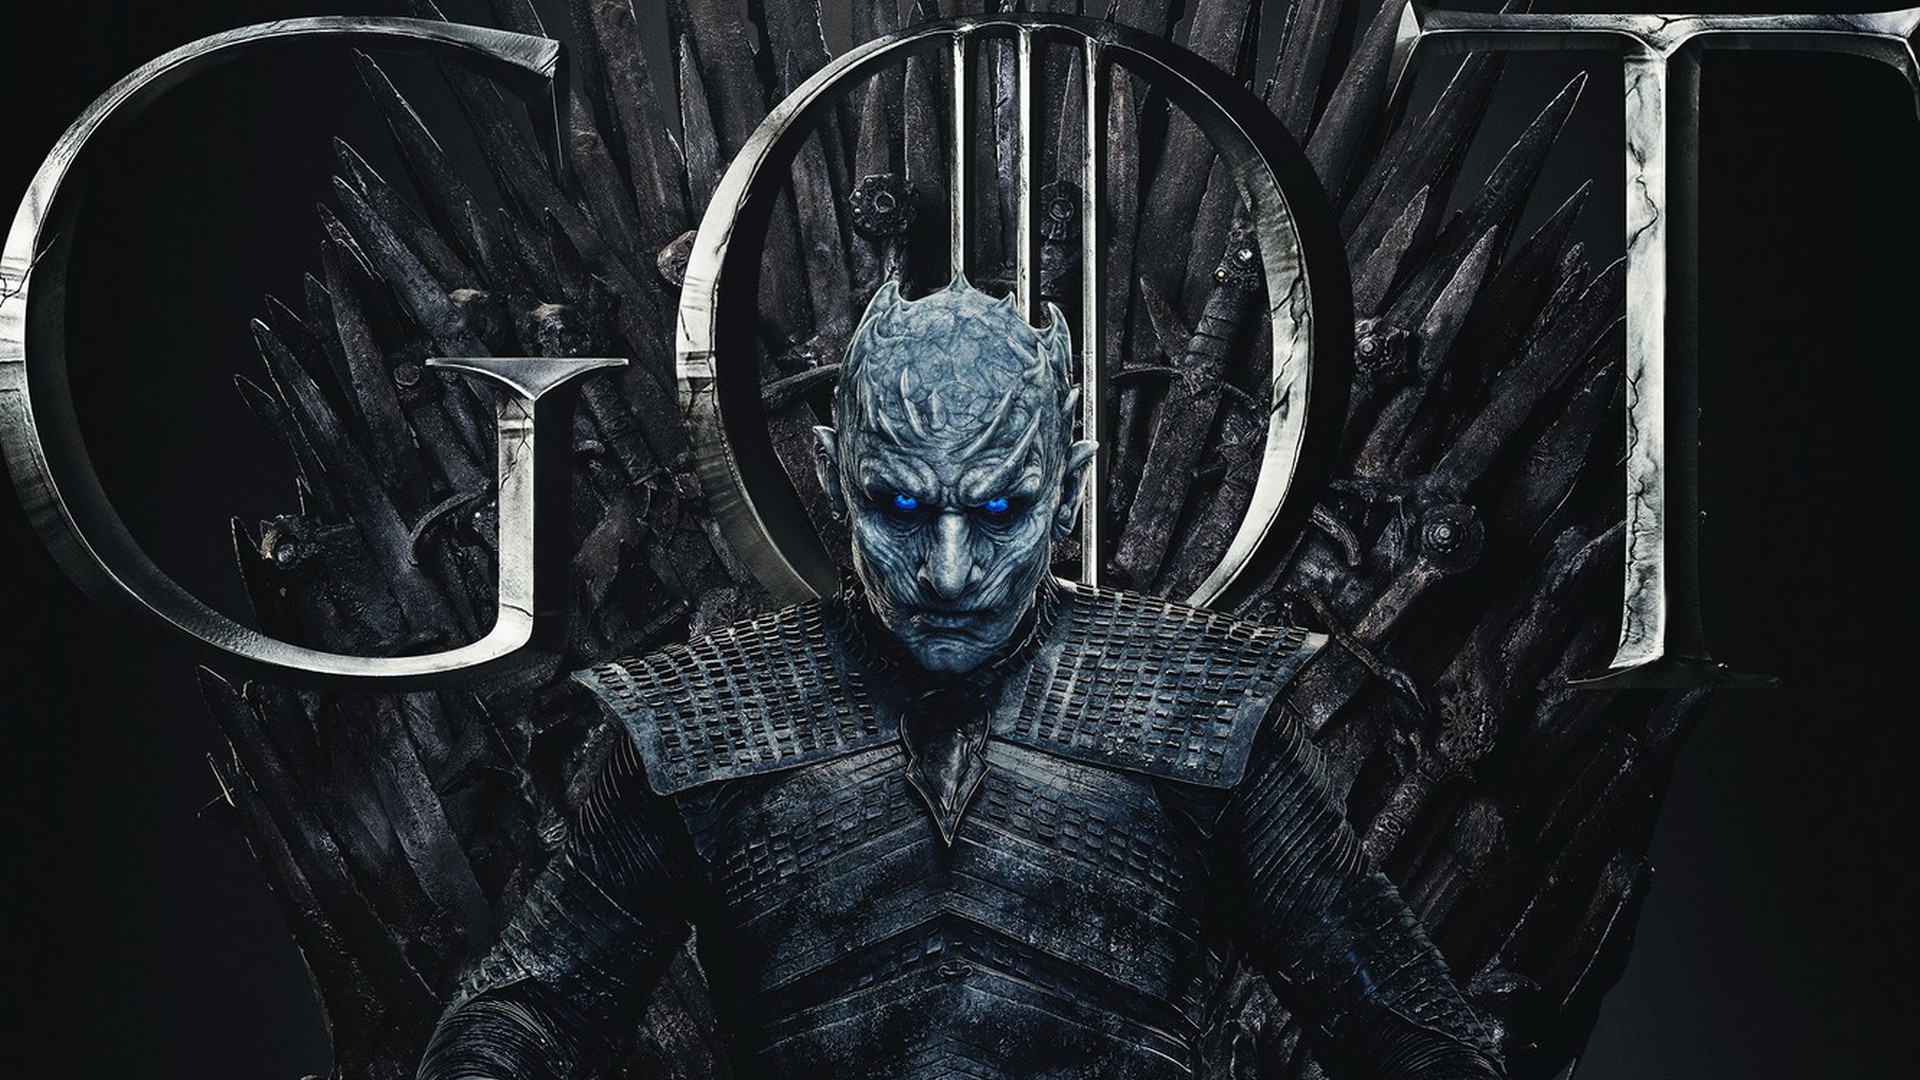 HD Game of Thrones 8 Season Wallpaper with high-resolution 1920x1080 pixel. You can use this poster wallpaper for your Desktop Computers, Mac Screensavers, Windows Backgrounds, iPhone Wallpapers, Tablet or Android Lock screen and another Mobile device